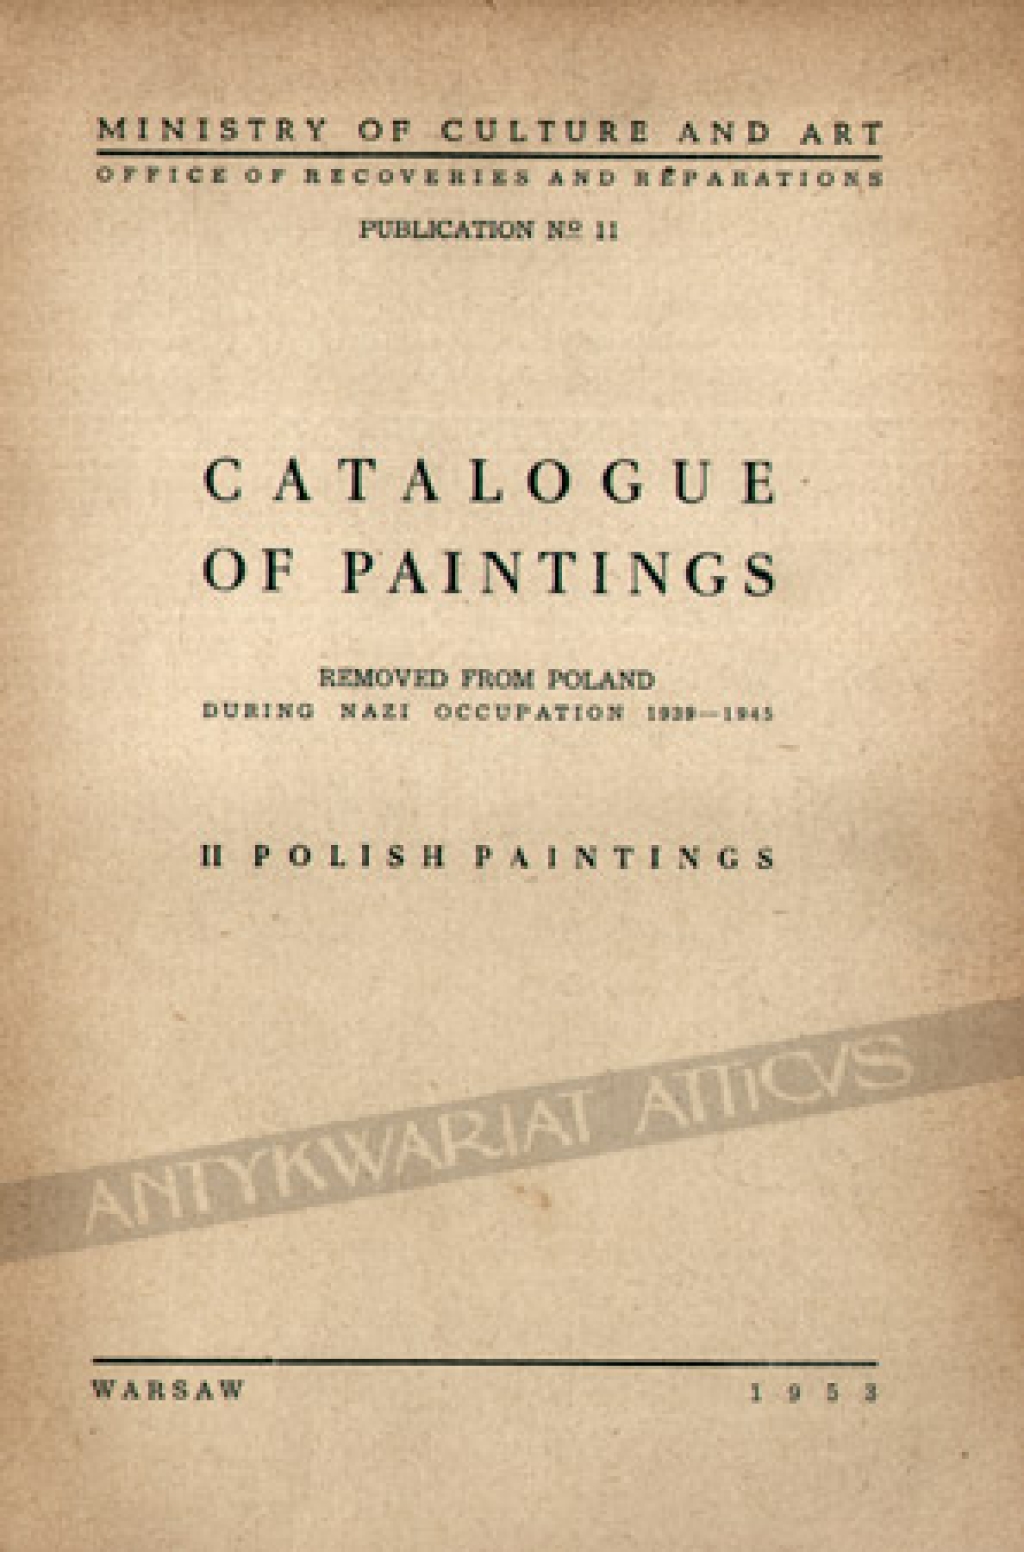 Catalogue of paintings removed from Poland during Nazi occupation 1939-1945, t. II - Polish paintings